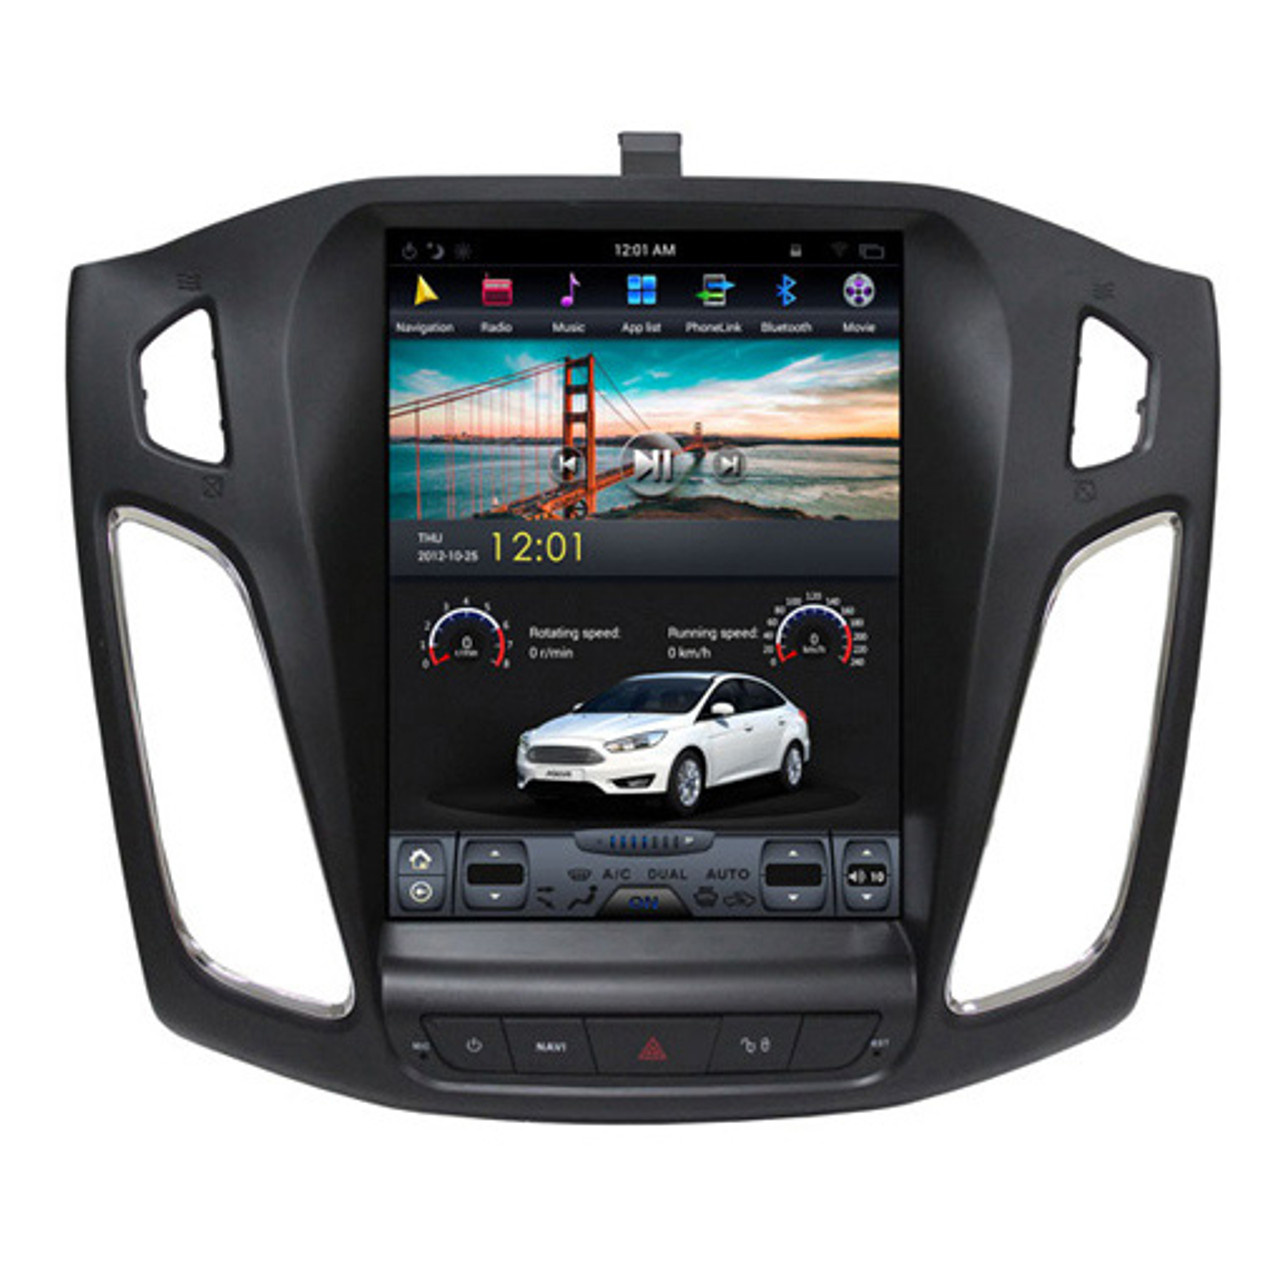 10.4-Inch Android Tesla Screen Multimedia System with Built-in GPS